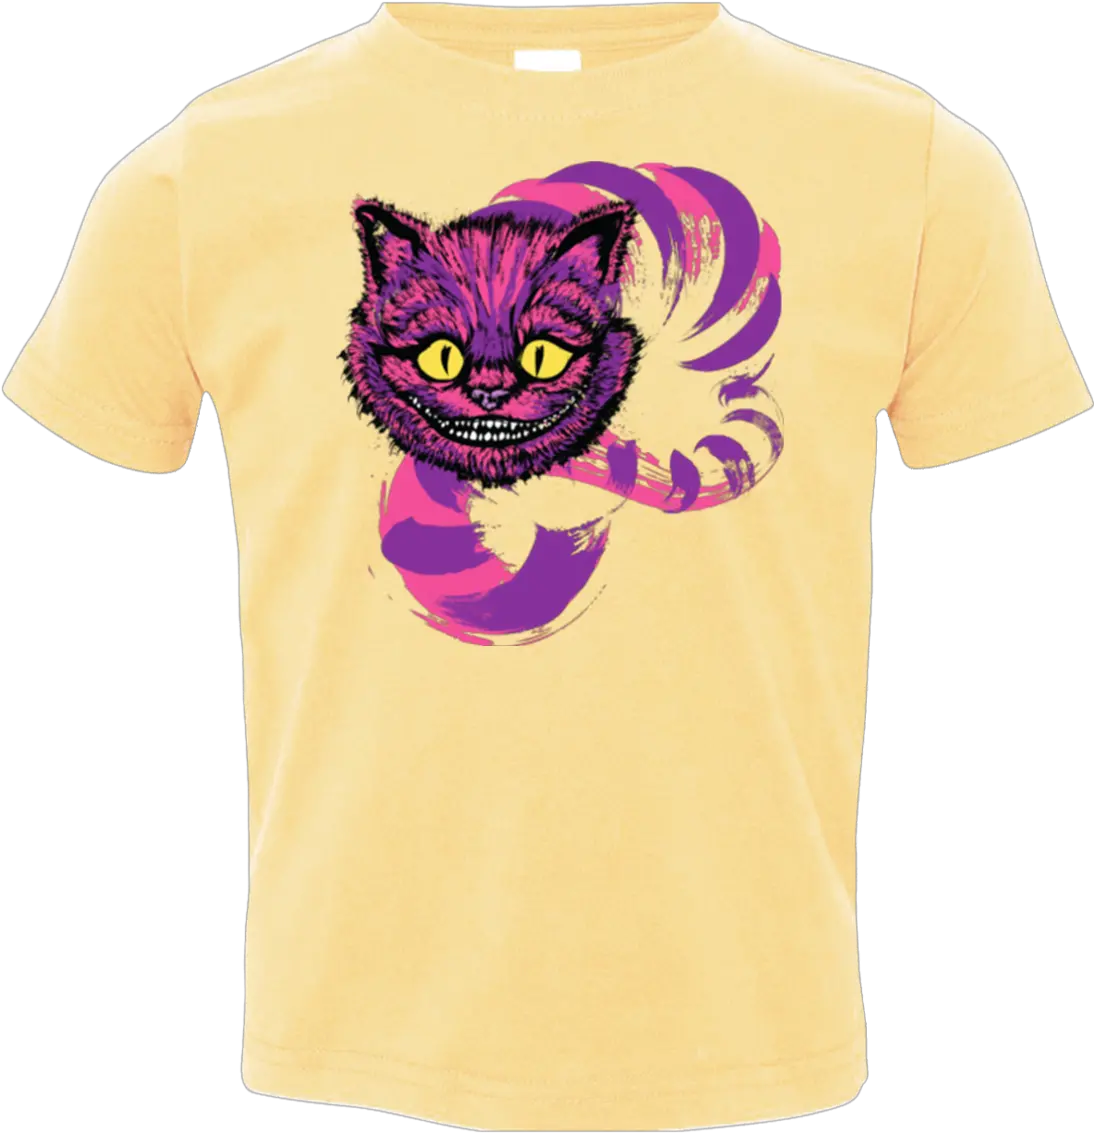 Grinning Like A Cheshire Cat 2 Toddler Premium T Shirt Png Cheshire Cat Smile Png